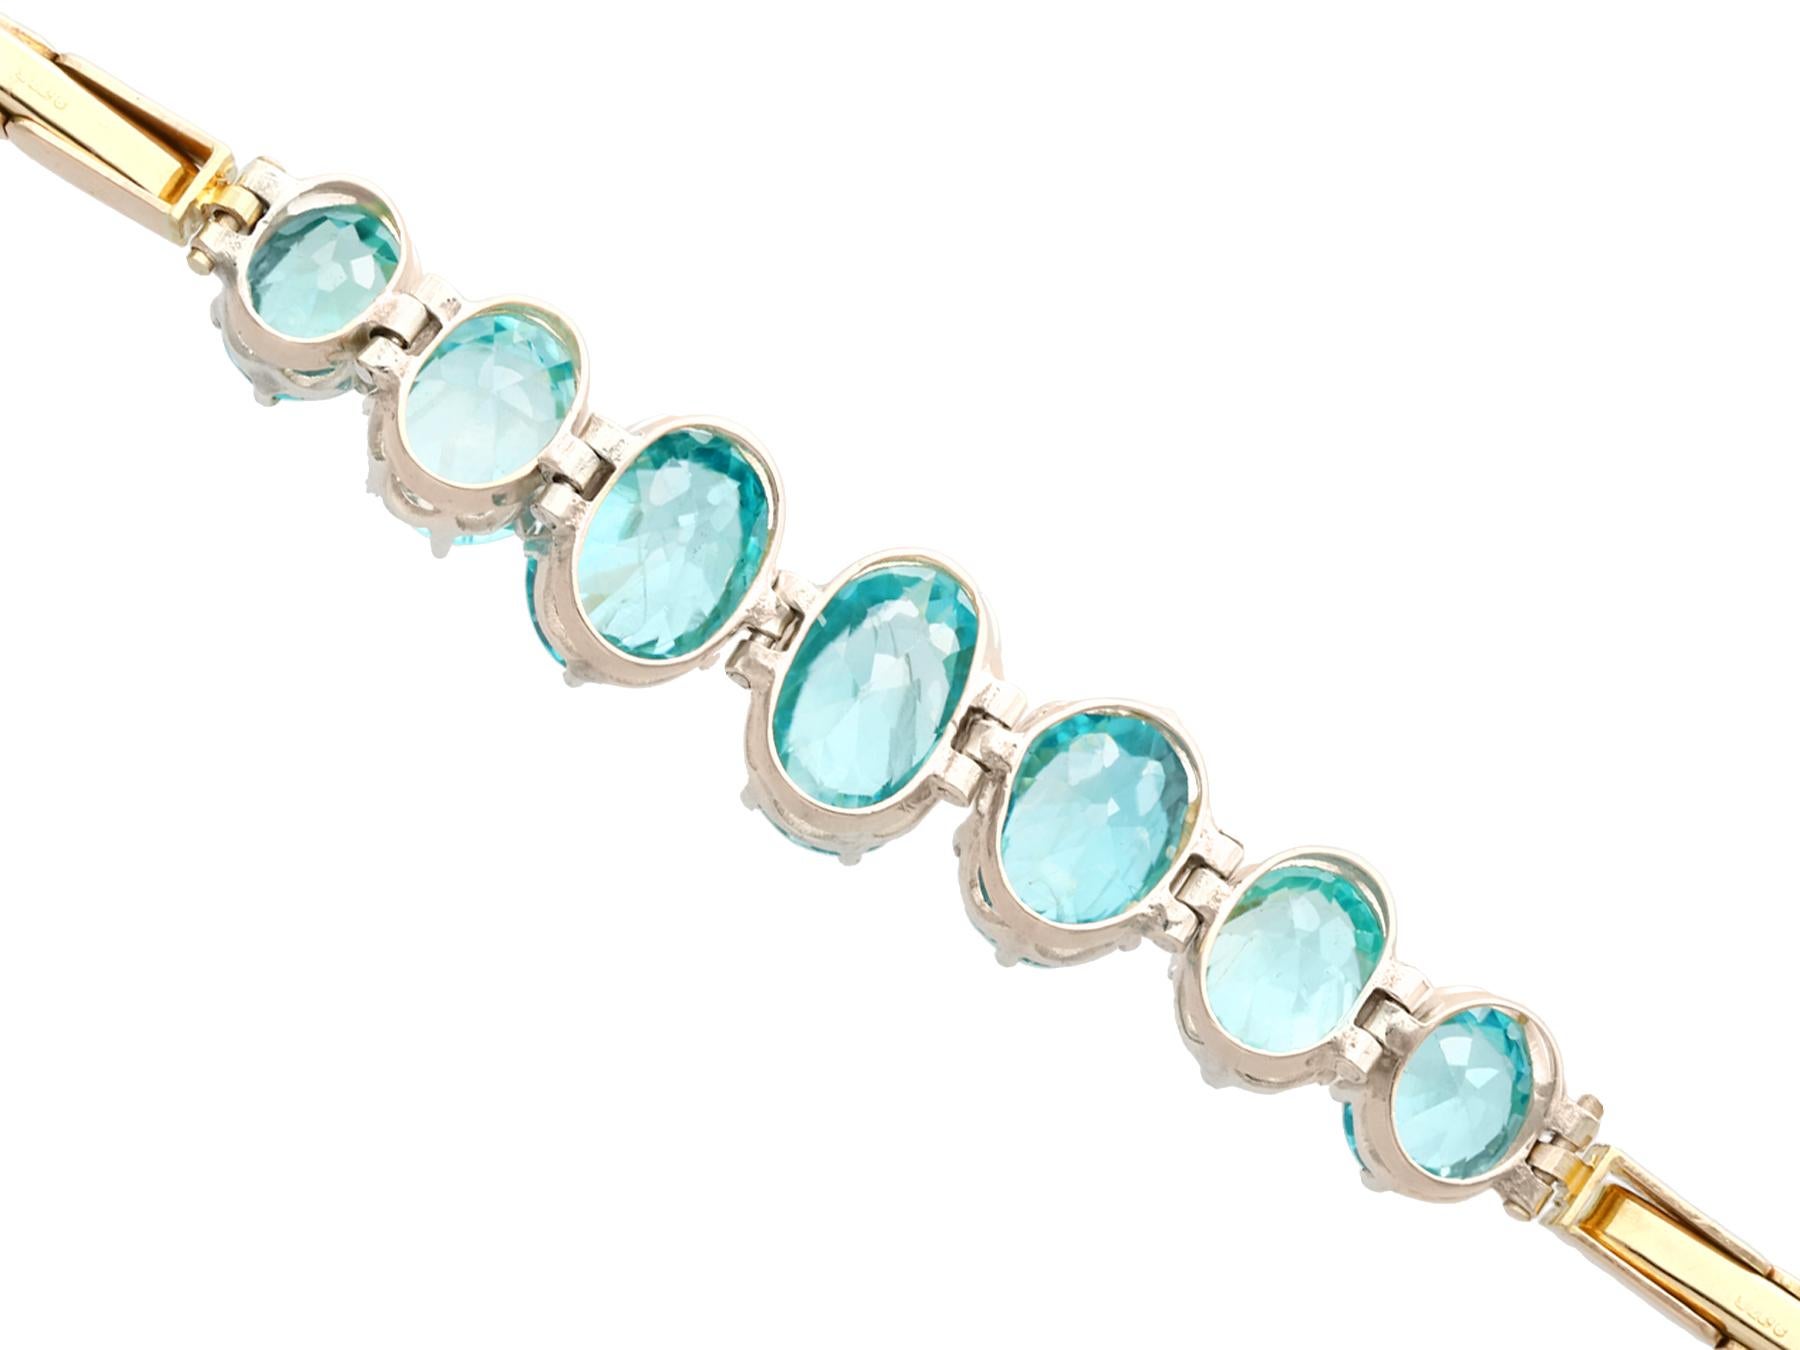 1950s Vintage 19.56ct Oval Cut Blue Zircon Yellow Gold Bracelet In Excellent Condition For Sale In Jesmond, Newcastle Upon Tyne